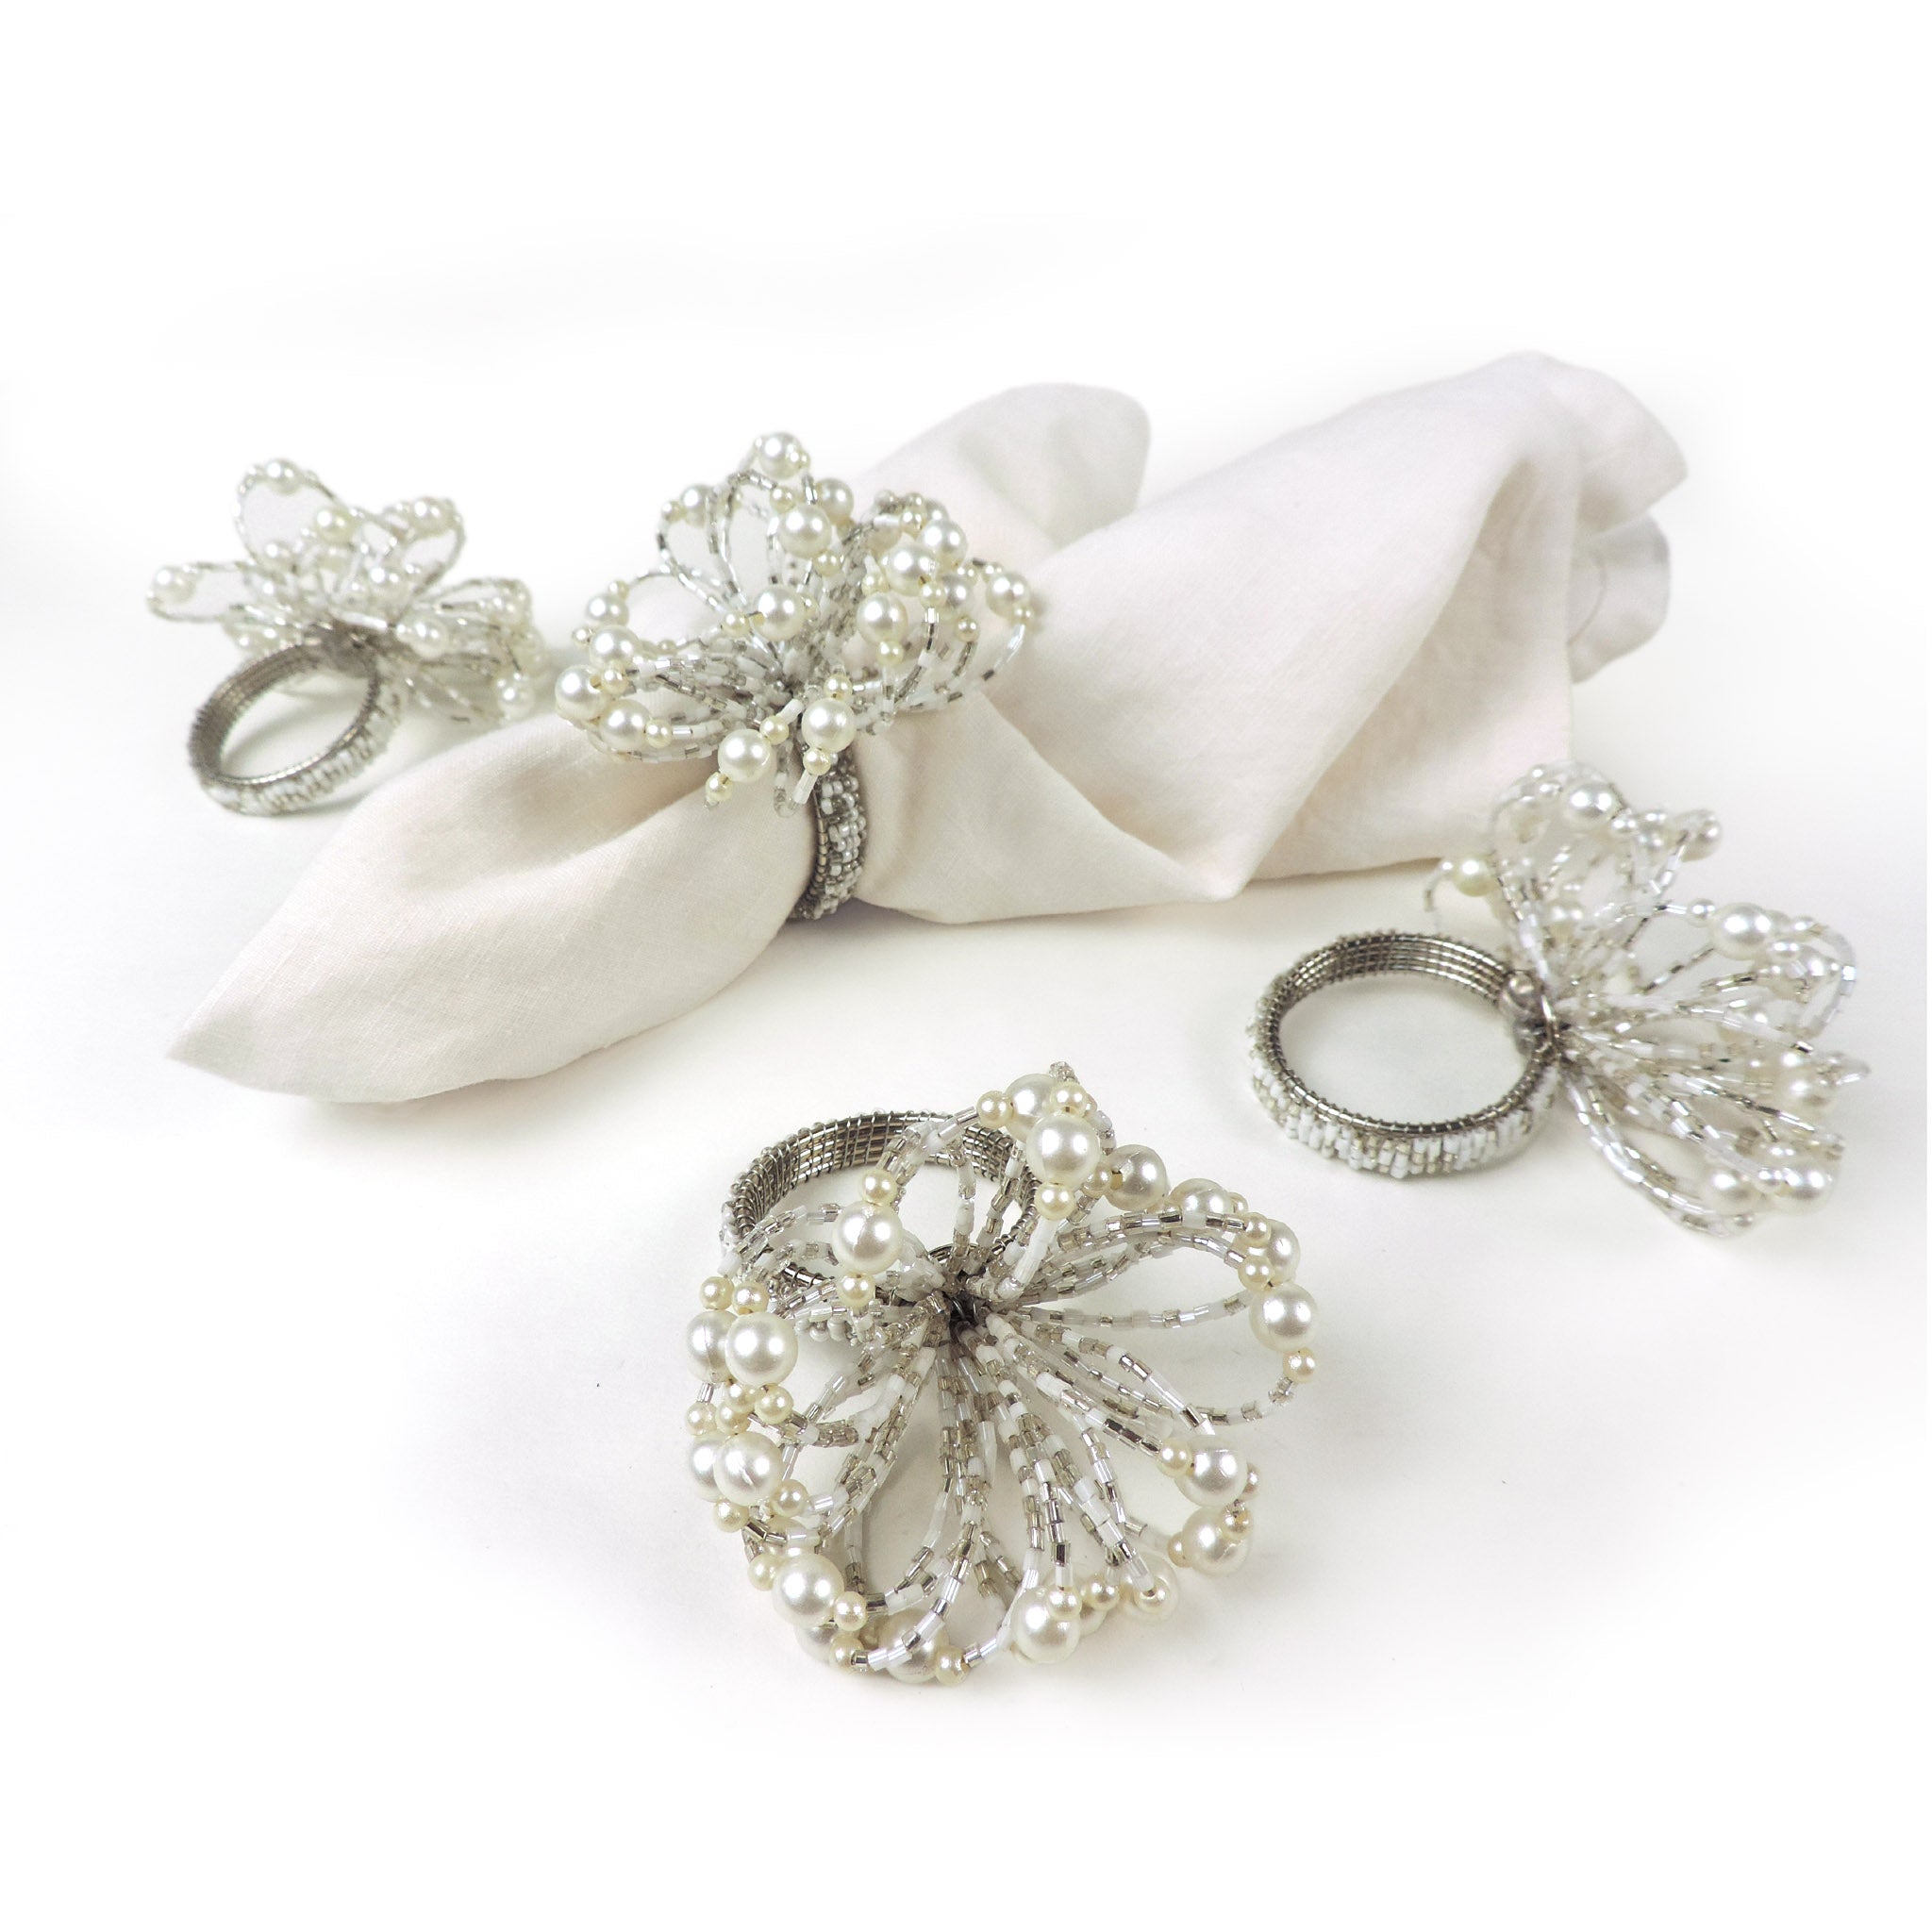 Pearl Flower Napkin Ring in White & Silver, Set of 4